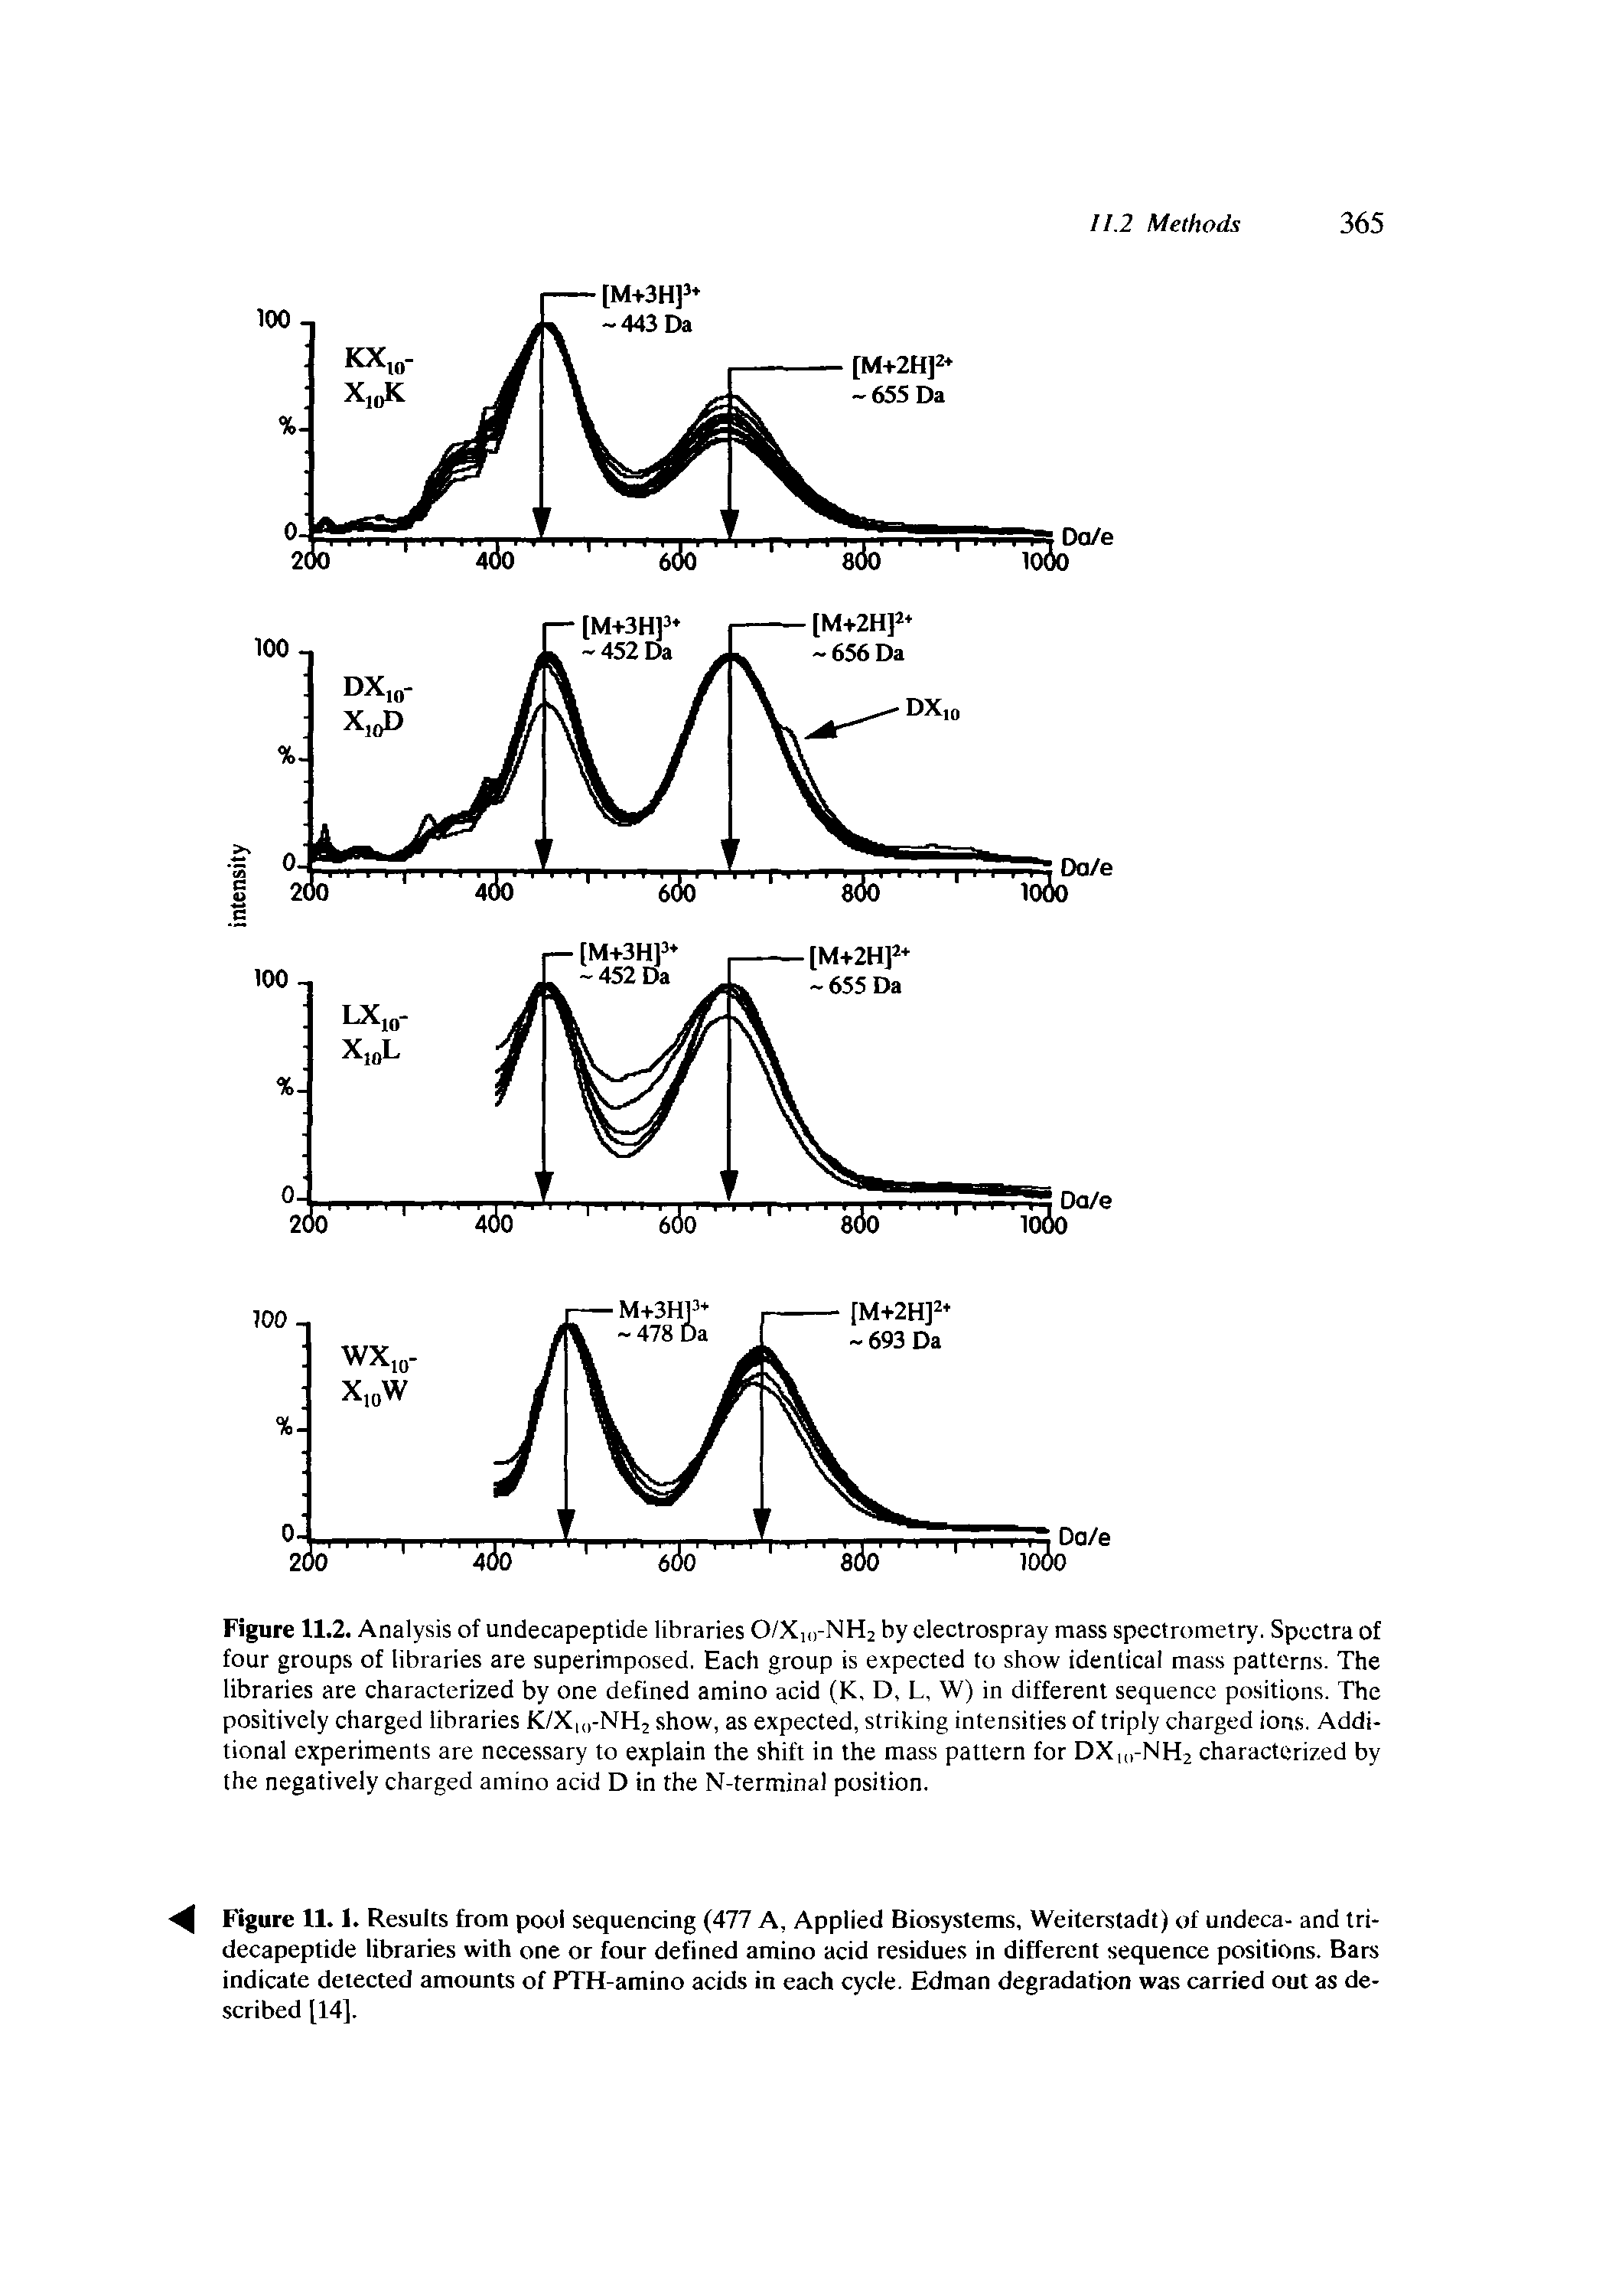 Figure 11.1. Results from pool sequencing (477 A, Applied Biosystems, Weiterstadt) of undeca- and tri-decapeptide libraries with one or four defined amino acid residues in different sequence positions. Bars indicate delected amounts of PTH-amino acids in each cycle. Edman degradation was carried out as described [14].